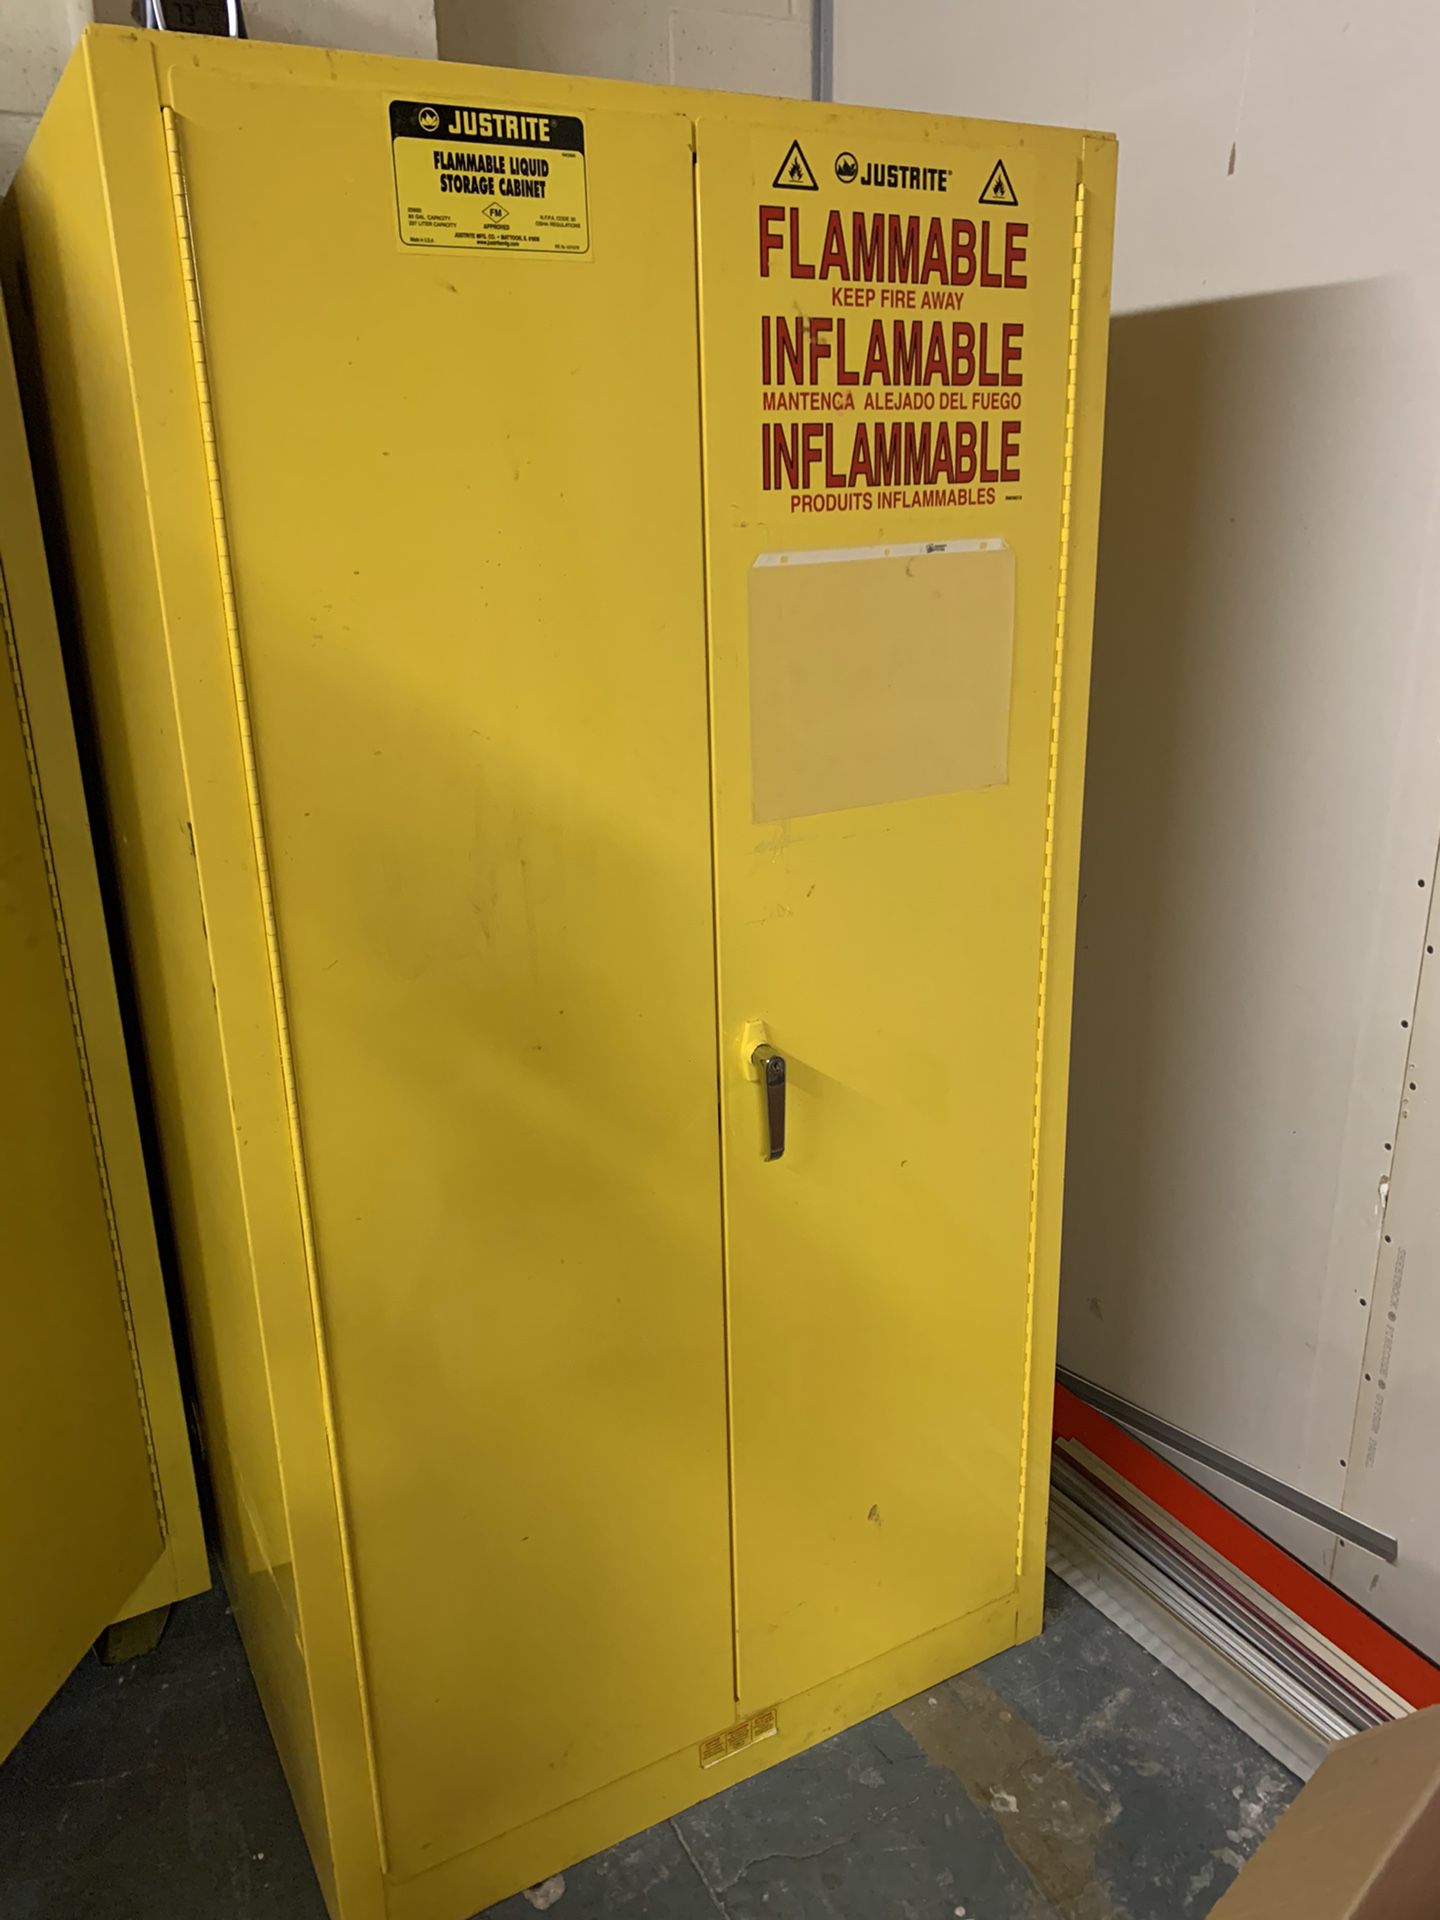 Flammable liquid storage safety cabinet 60 gal capacity